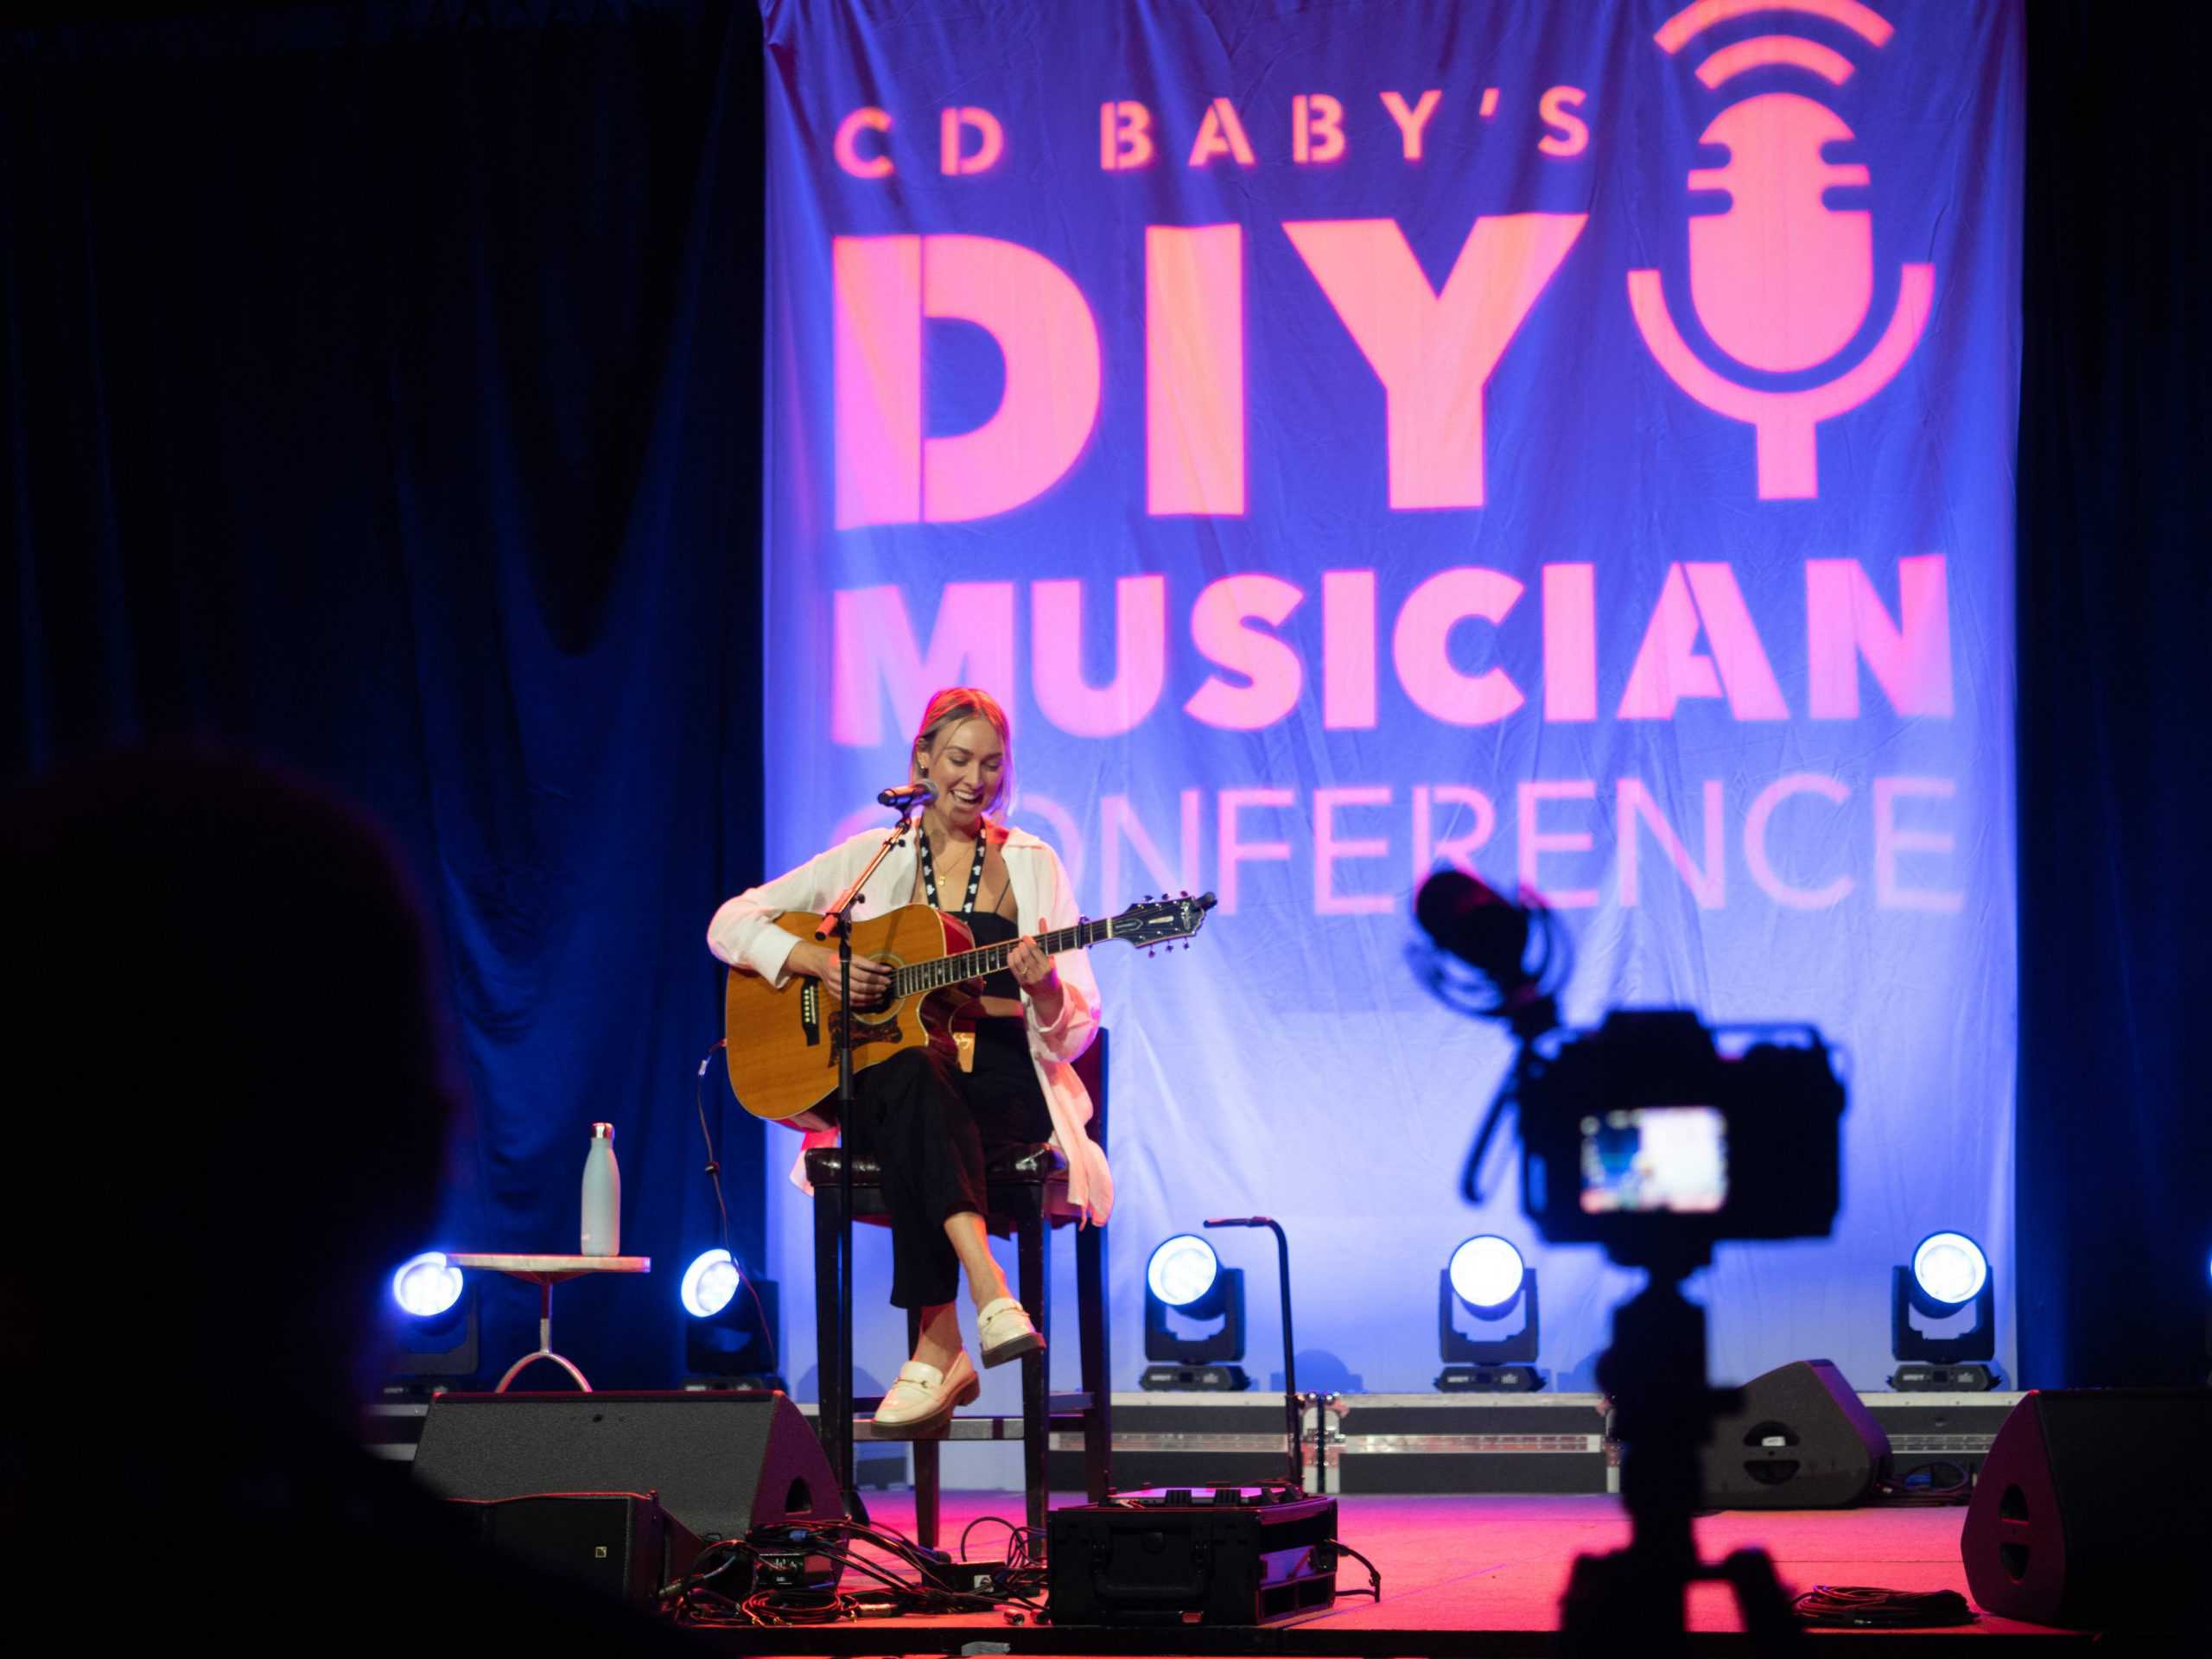 7 important takeaways from the DIY Musician Conference 2022 Hypebot